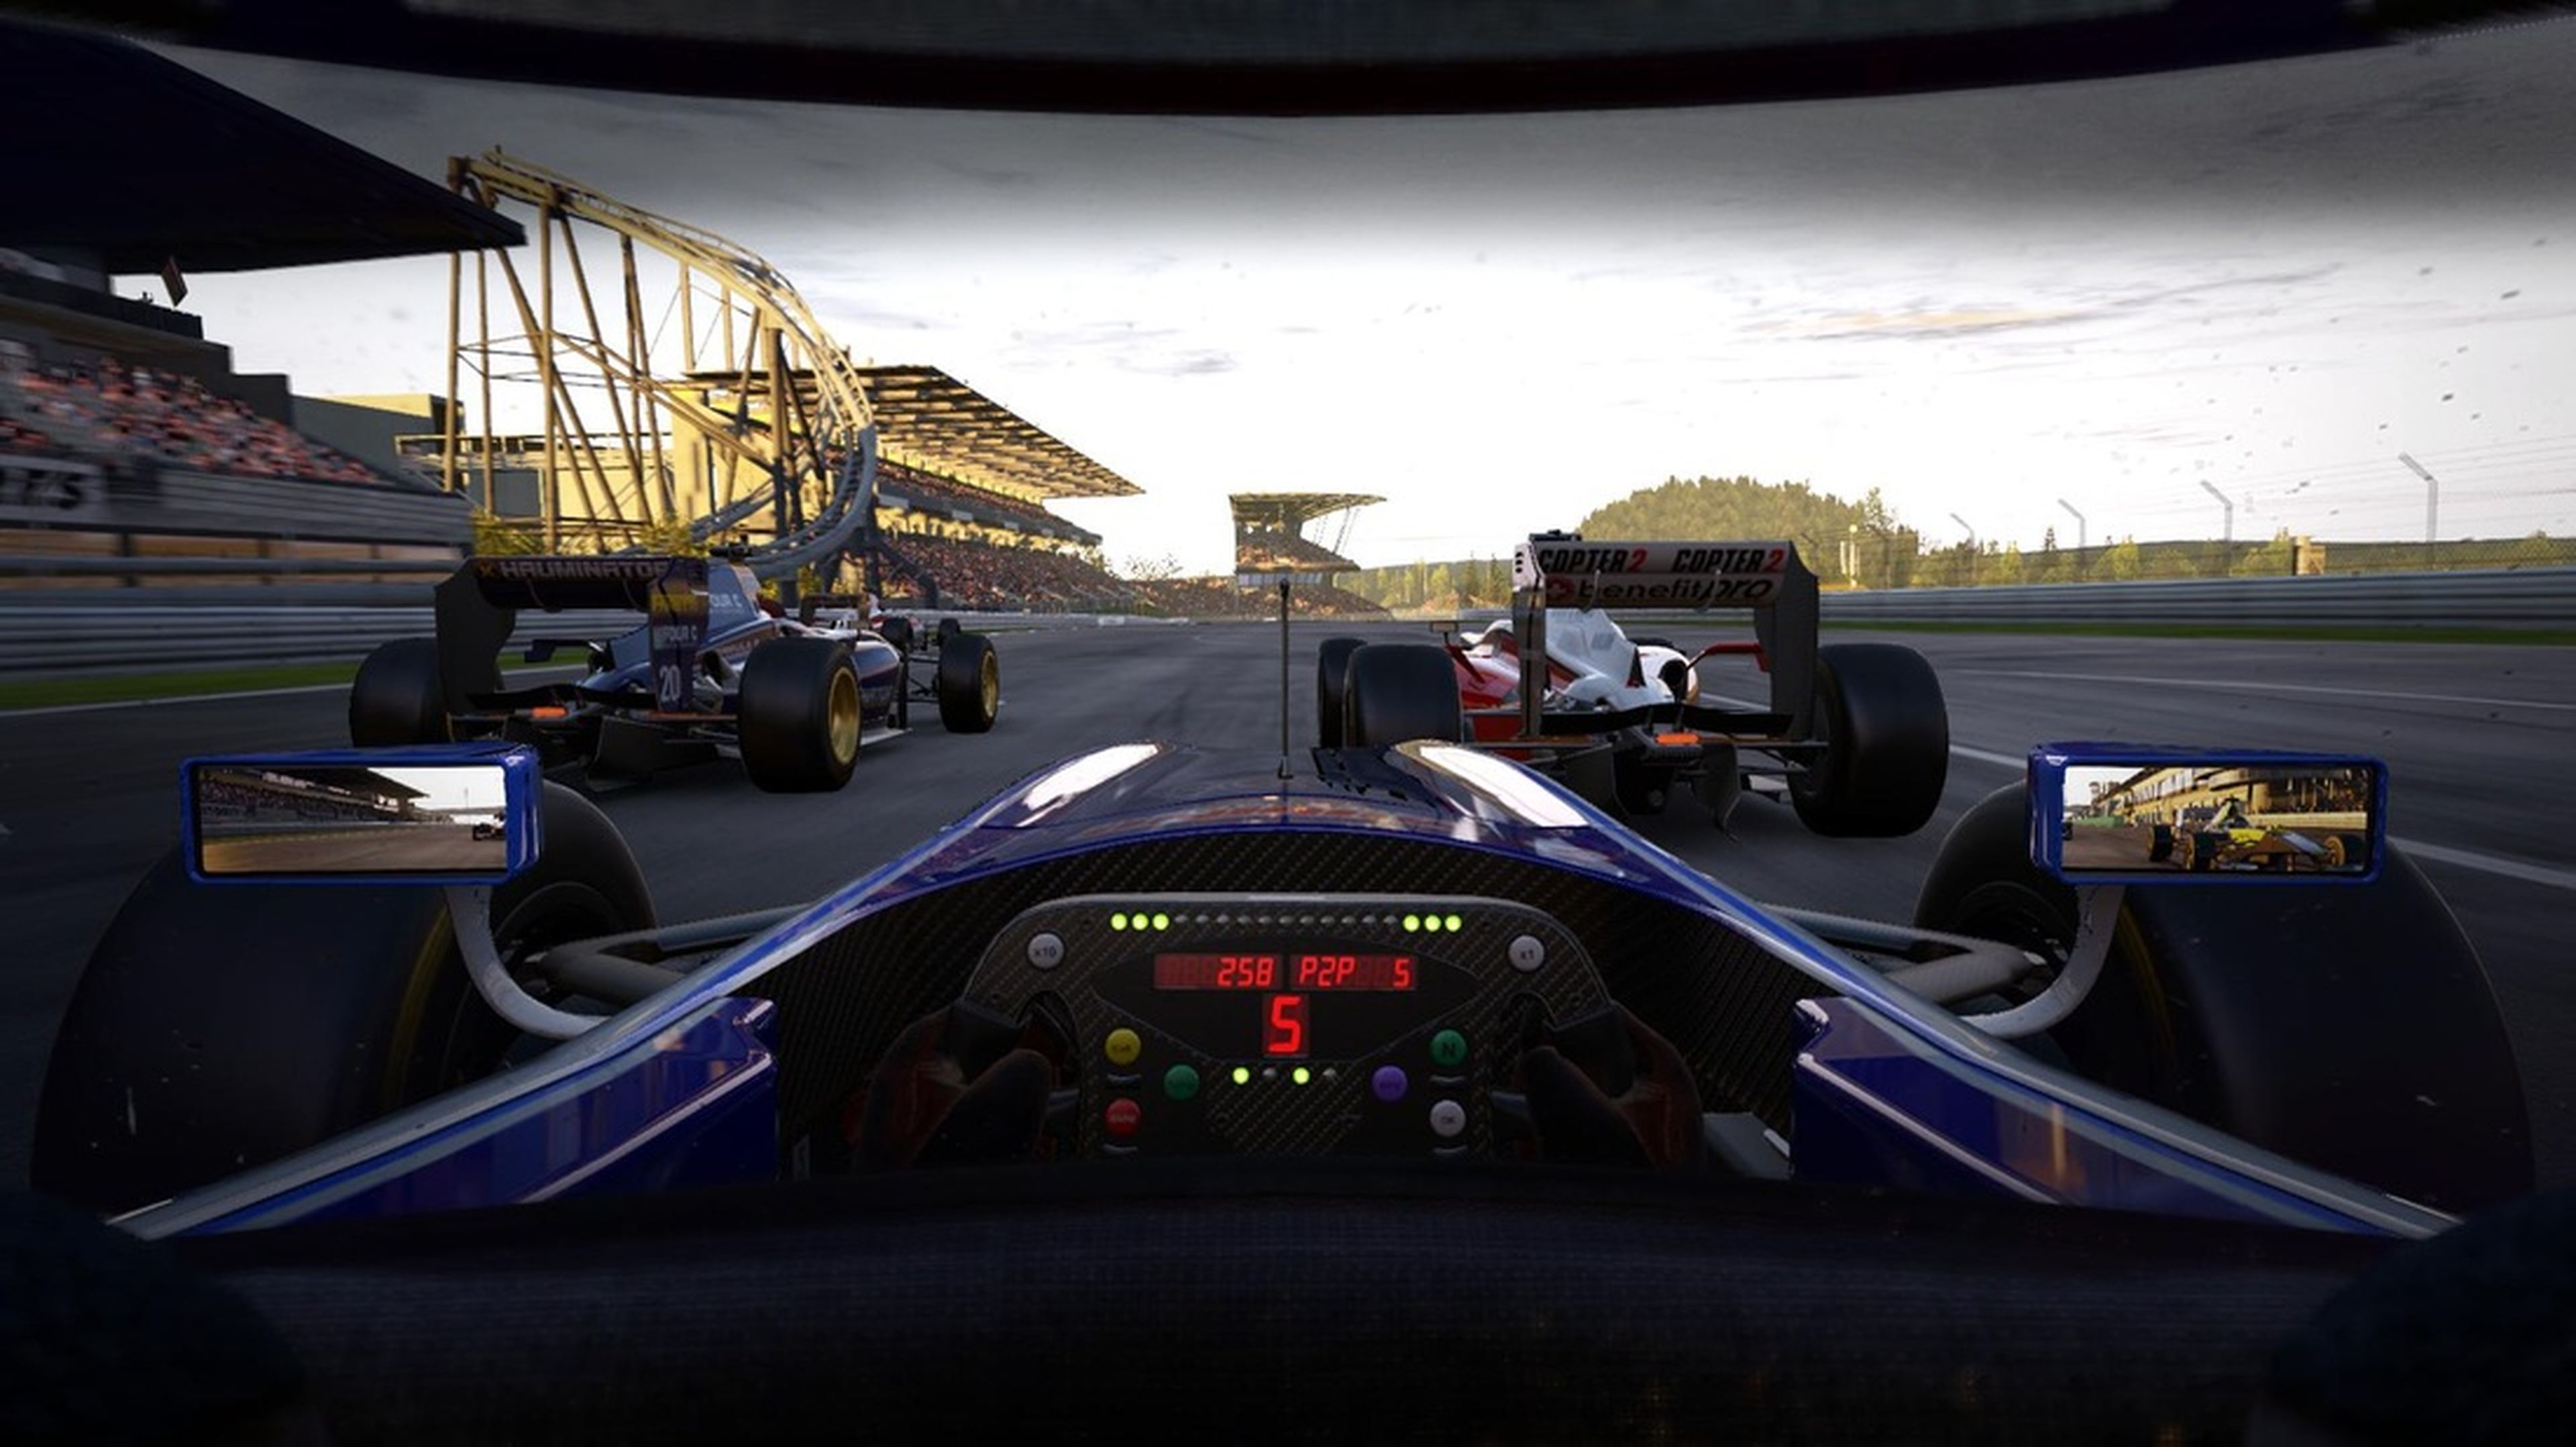 Ps4 project. Project cars VR. Project cars ps4. Игра Project cars 4. Project cars вид из шлема.